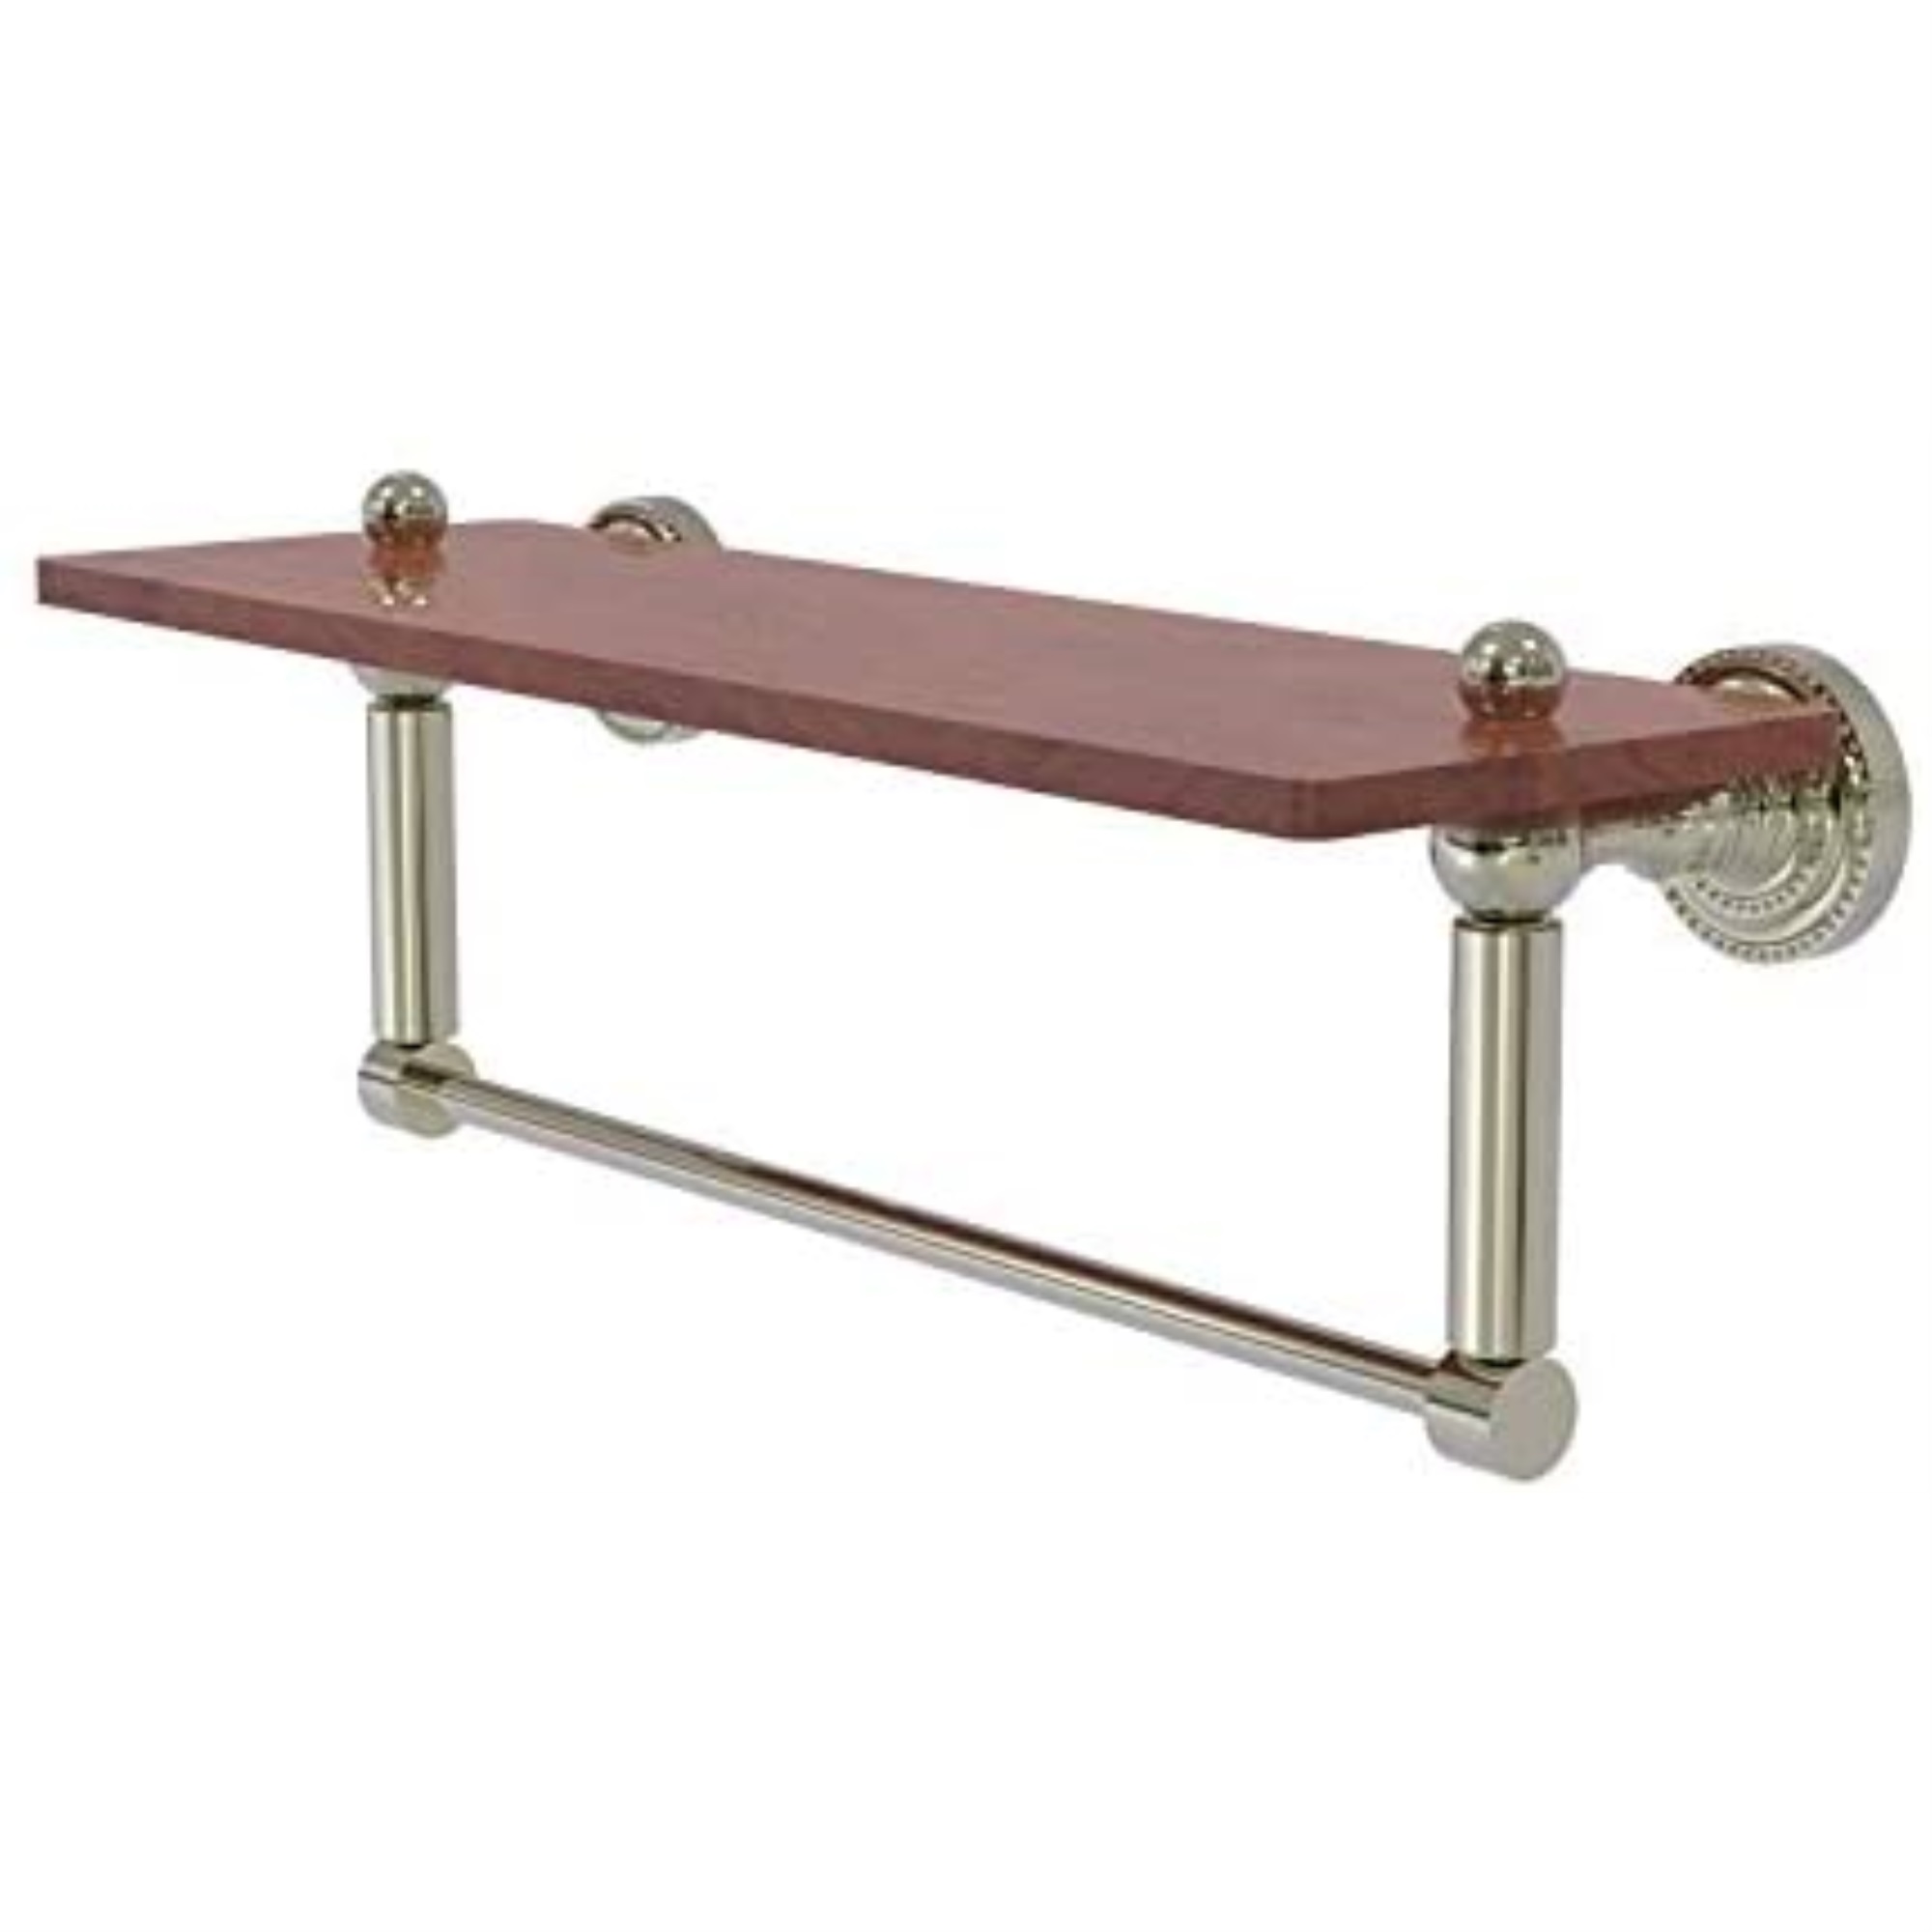 Allied Brass Dottingham Collection 16 Inch Solid IPE Ironwood Shelf with Integrated  Towel Bar - DT-1TB-16-IRW-PNI | Walmart Canada